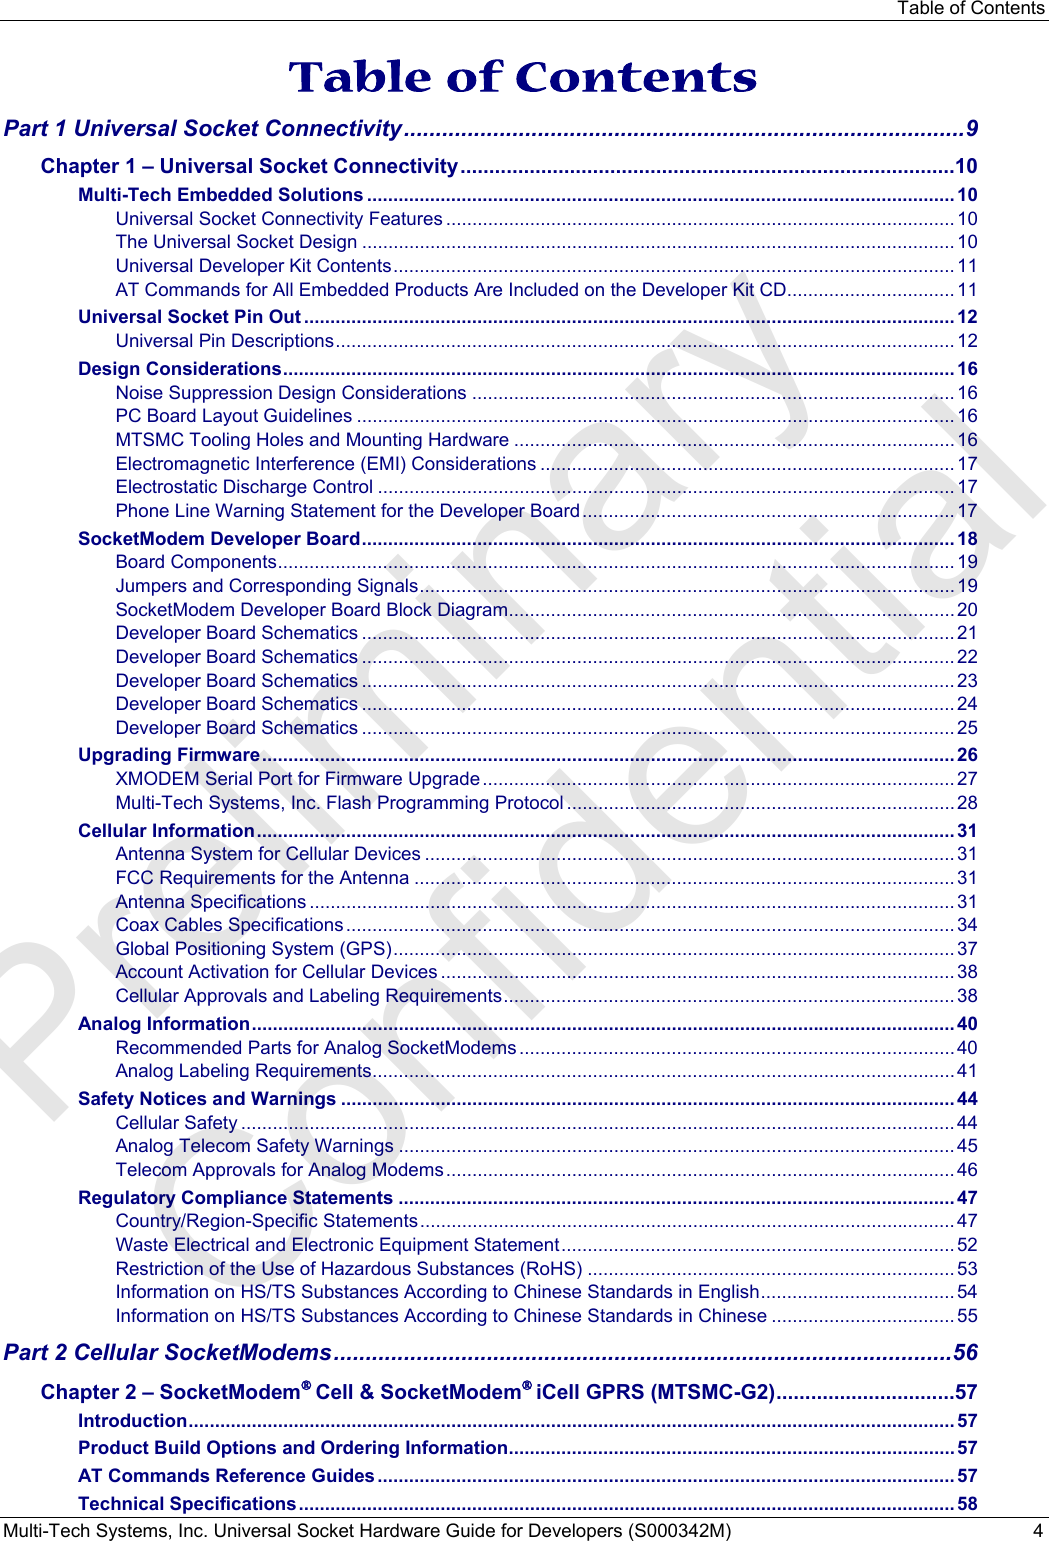 Table of Contents Multi-Tech Systems, Inc. Universal Socket Hardware Guide for Developers (S000342M)  4  Table of Contents Part 1 Universal Socket Connectivity ........................................................................................ 9 Chapter 1 – Universal Socket Connectivity ...................................................................................... 10 Multi-Tech Embedded Solutions ................................................................................................................ 10 Universal Socket Connectivity Features ................................................................................................. 10 The Universal Socket Design ................................................................................................................. 10 Universal Developer Kit Contents ........................................................................................................... 11 AT Commands for All Embedded Products Are Included on the Developer Kit CD ................................ 11 Universal Socket Pin Out ............................................................................................................................ 12 Universal Pin Descriptions ...................................................................................................................... 12 Design Considerations ................................................................................................................................ 16 Noise Suppression Design Considerations ............................................................................................ 16 PC Board Layout Guidelines .................................................................................................................. 16 MTSMC Tooling Holes and Mounting Hardware .................................................................................... 16 Electromagnetic Interference (EMI) Considerations ............................................................................... 17 Electrostatic Discharge Control .............................................................................................................. 17 Phone Line Warning Statement for the Developer Board ....................................................................... 17 SocketModem Developer Board ................................................................................................................. 18 Board Components ................................................................................................................................. 19 Jumpers and Corresponding Signals ...................................................................................................... 19 SocketModem Developer Board Block Diagram ..................................................................................... 20 Developer Board Schematics ................................................................................................................. 21 Developer Board Schematics ................................................................................................................. 22 Developer Board Schematics ................................................................................................................. 23 Developer Board Schematics ................................................................................................................. 24 Developer Board Schematics ................................................................................................................. 25 Upgrading Firmware .................................................................................................................................... 26 XMODEM Serial Port for Firmware Upgrade .......................................................................................... 27 Multi-Tech Systems, Inc. Flash Programming Protocol .......................................................................... 28 Cellular Information ..................................................................................................................................... 31 Antenna System for Cellular Devices ..................................................................................................... 31 FCC Requirements for the Antenna ....................................................................................................... 31 Antenna Specifications ........................................................................................................................... 31 Coax Cables Specifications .................................................................................................................... 34 Global Positioning System (GPS) ........................................................................................................... 37 Account Activation for Cellular Devices .................................................................................................. 38 Cellular Approvals and Labeling Requirements ...................................................................................... 38 Analog Information ...................................................................................................................................... 40 Recommended Parts for Analog SocketModems ................................................................................... 40 Analog Labeling Requirements ............................................................................................................... 41 Safety Notices and Warnings ..................................................................................................................... 44 Cellular Safety ........................................................................................................................................ 44 Analog Telecom Safety Warnings .......................................................................................................... 45 Telecom Approvals for Analog Modems ................................................................................................. 46 Regulatory Compliance Statements .......................................................................................................... 47 Country/Region-Specific Statements ...................................................................................................... 47 Waste Electrical and Electronic Equipment Statement ........................................................................... 52 Restriction of the Use of Hazardous Substances (RoHS) ...................................................................... 53 Information on HS/TS Substances According to Chinese Standards in English .....................................  54 Information on HS/TS Substances According to Chinese Standards in Chinese ................................... 55 Part 2 Cellular SocketModems ................................................................................................. 56 Chapter 2 – SocketModem® Cell &amp; SocketModem® iCell GPRS (MTSMC-G2) ............................... 57 Introduction .................................................................................................................................................. 57 Product Build Options and Ordering Information ..................................................................................... 57 AT Commands Reference Guides .............................................................................................................. 57 Technical Specifications ............................................................................................................................. 58 Preliminary  Confidential